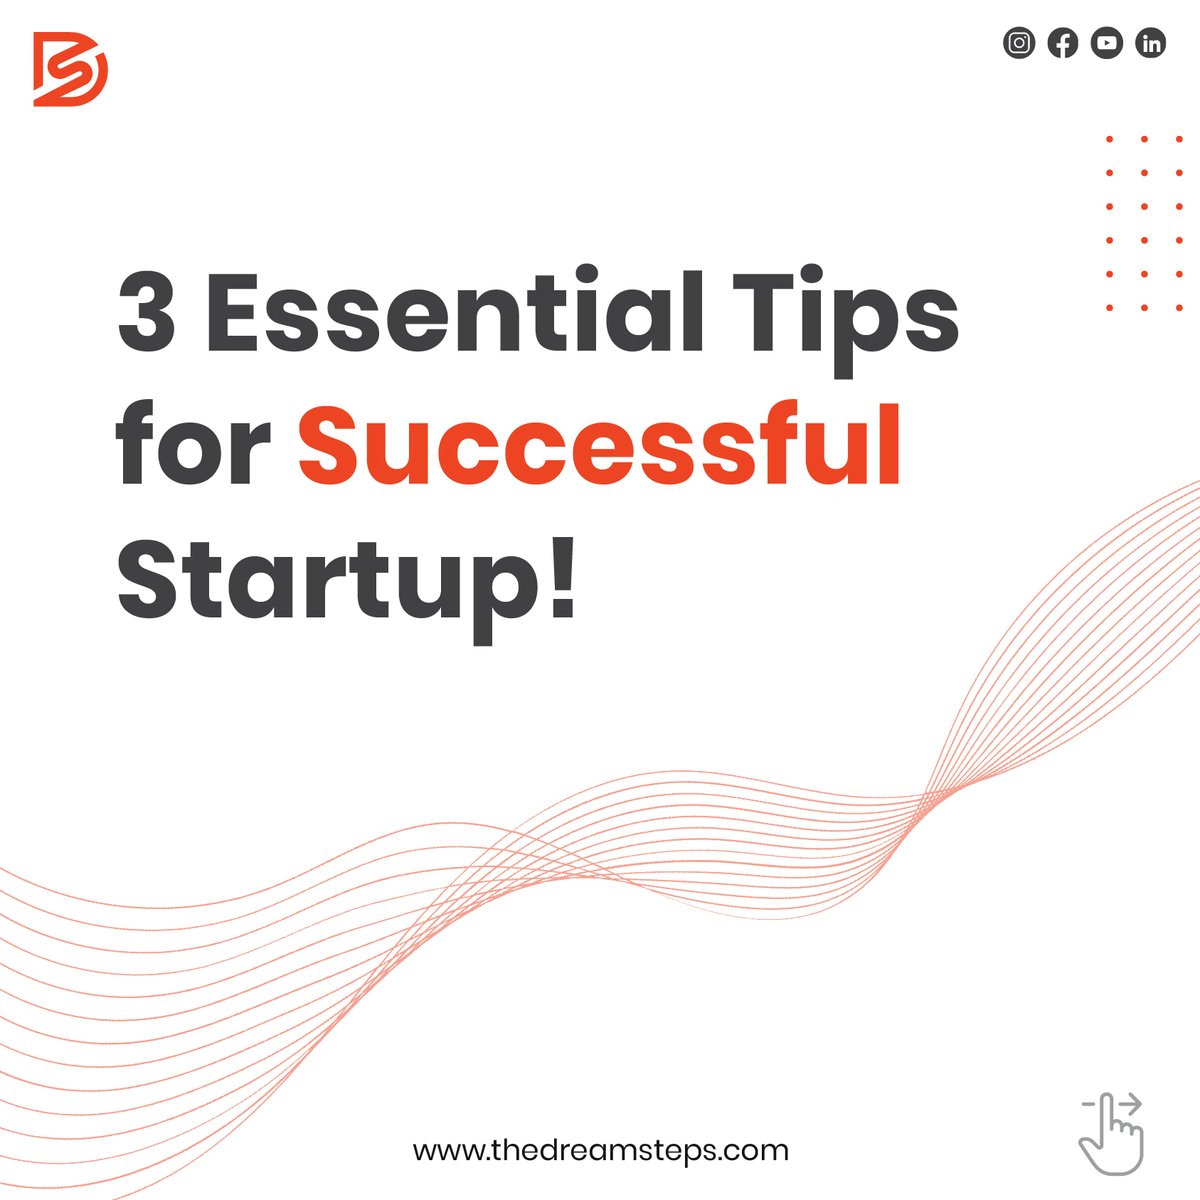 Check out the full post on LinkedIn: shorturl.at/fmCPR.

#StartupSuccess #BusinessTips #BusinessGrowth #TipTuesday #Brand #Startup #StartupTips #Dreamers #TeamDreamSteps